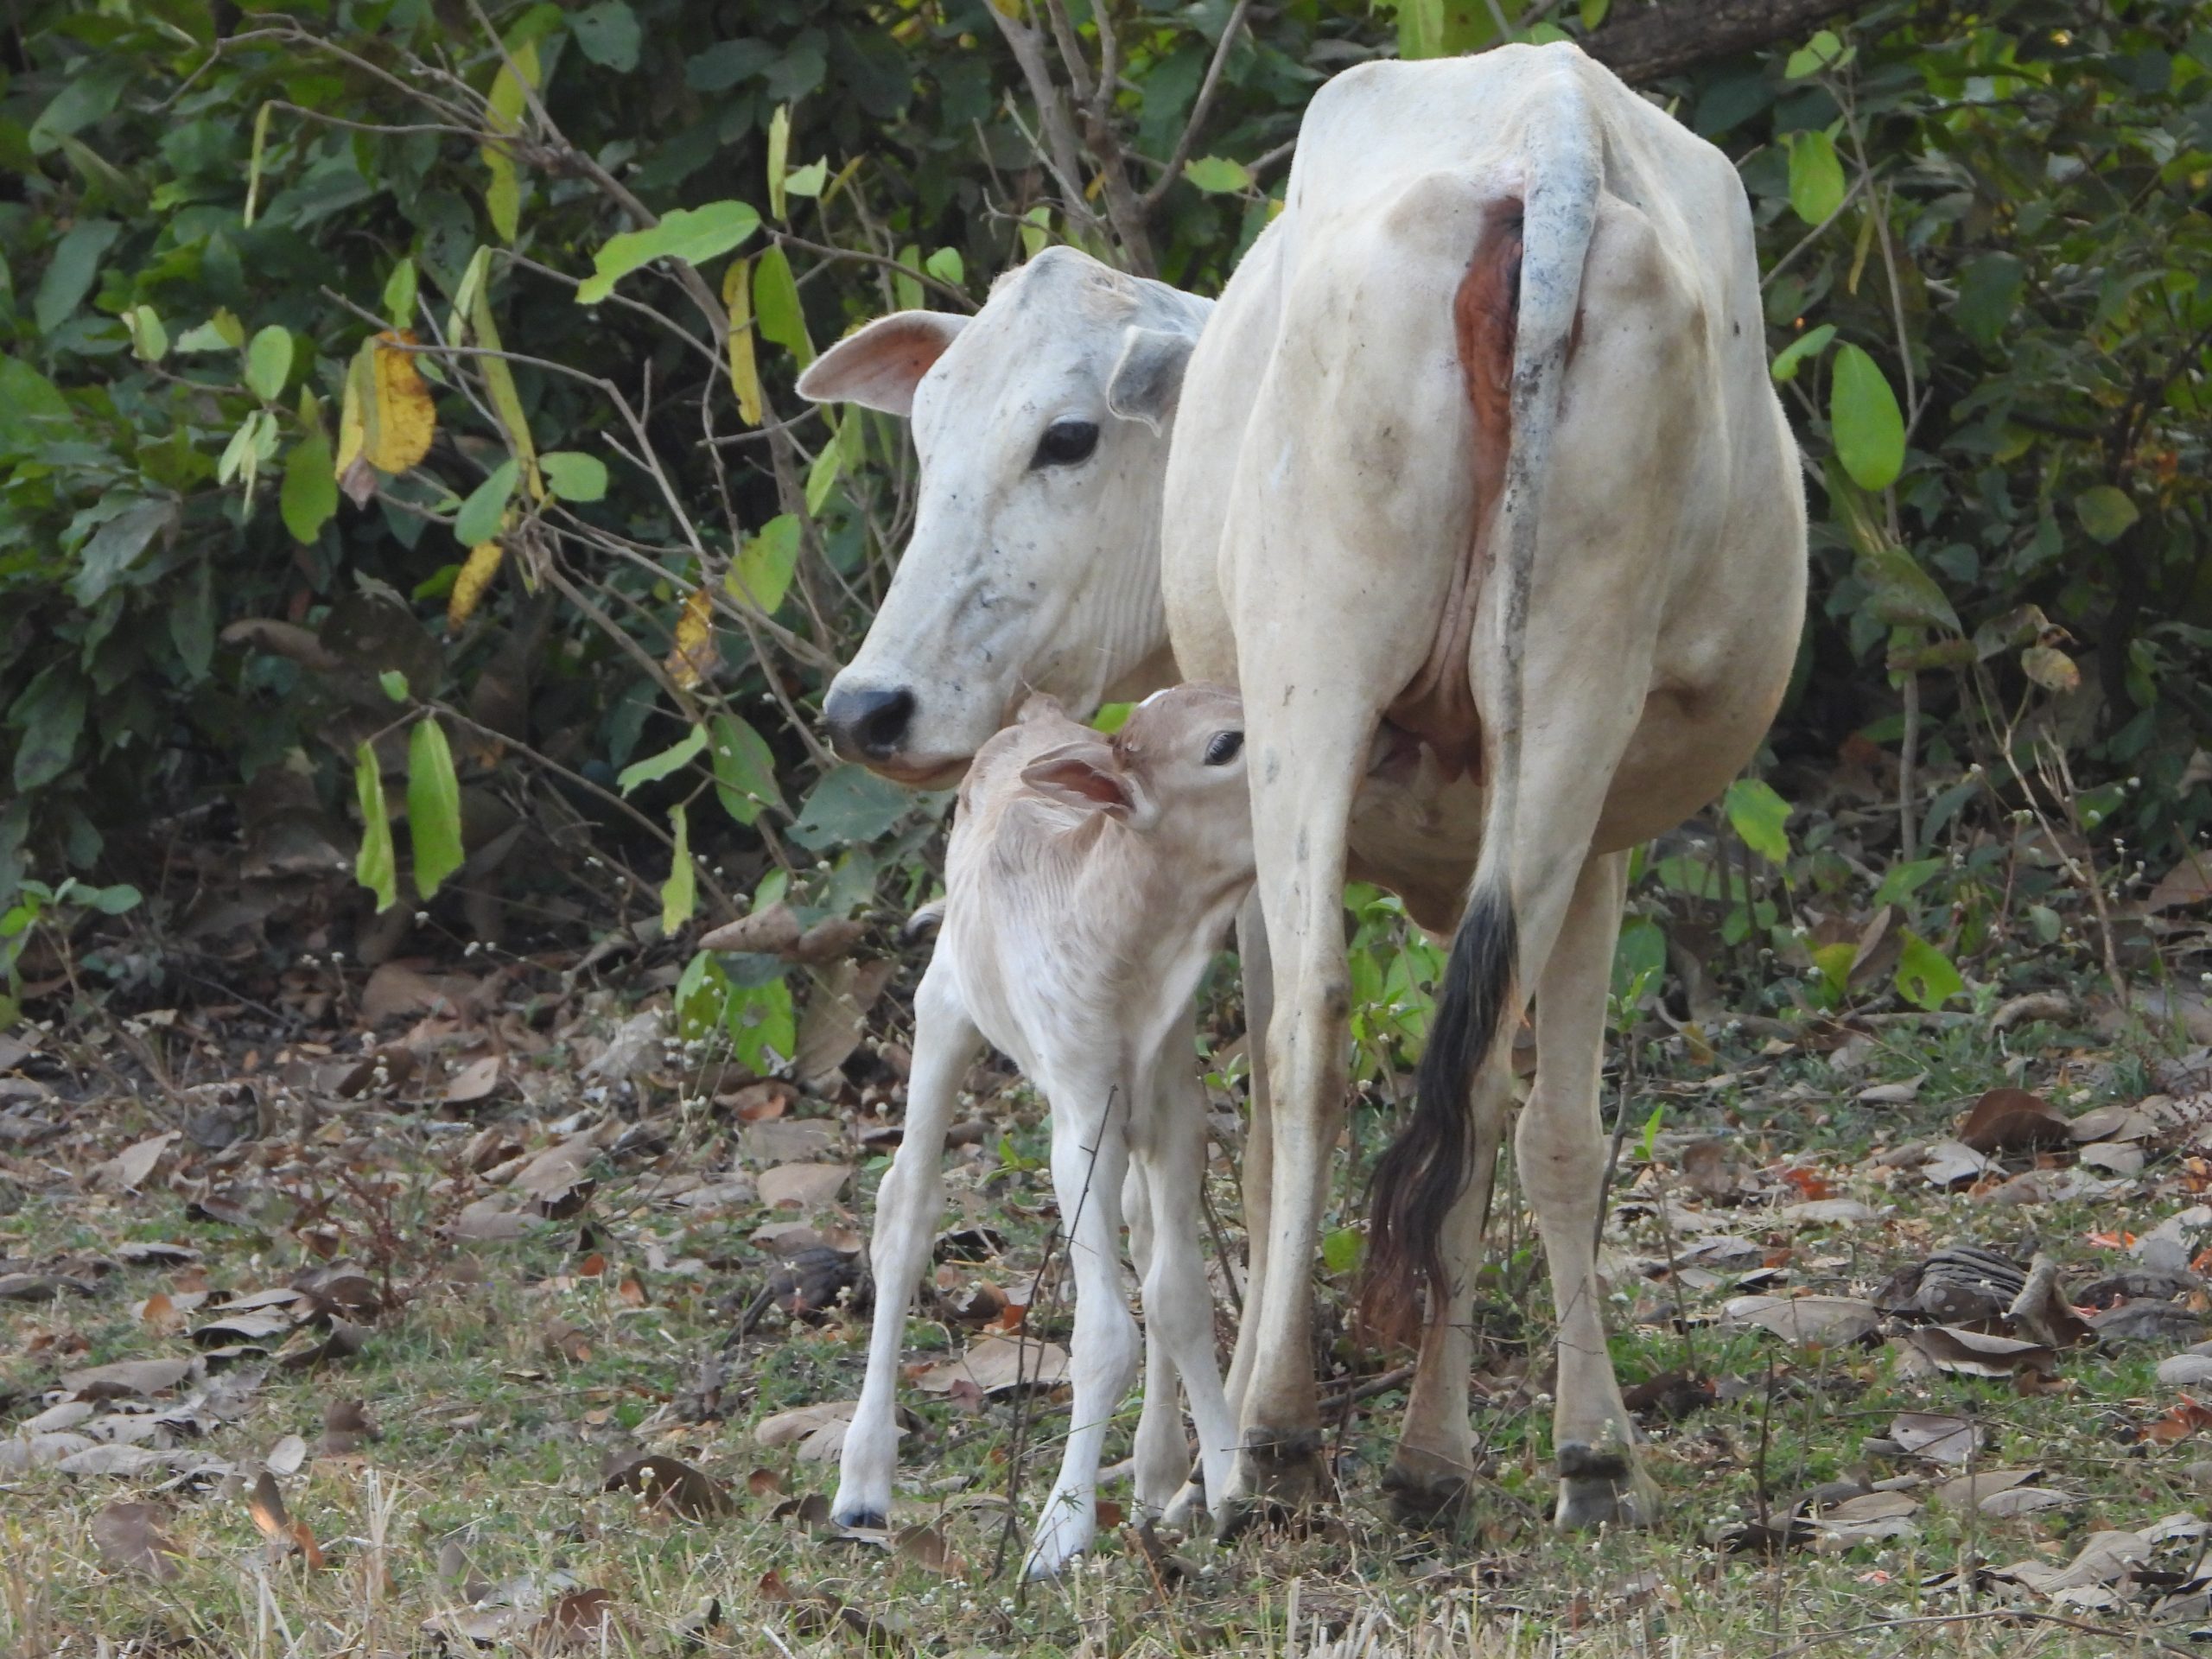 Calf and cow in the farm